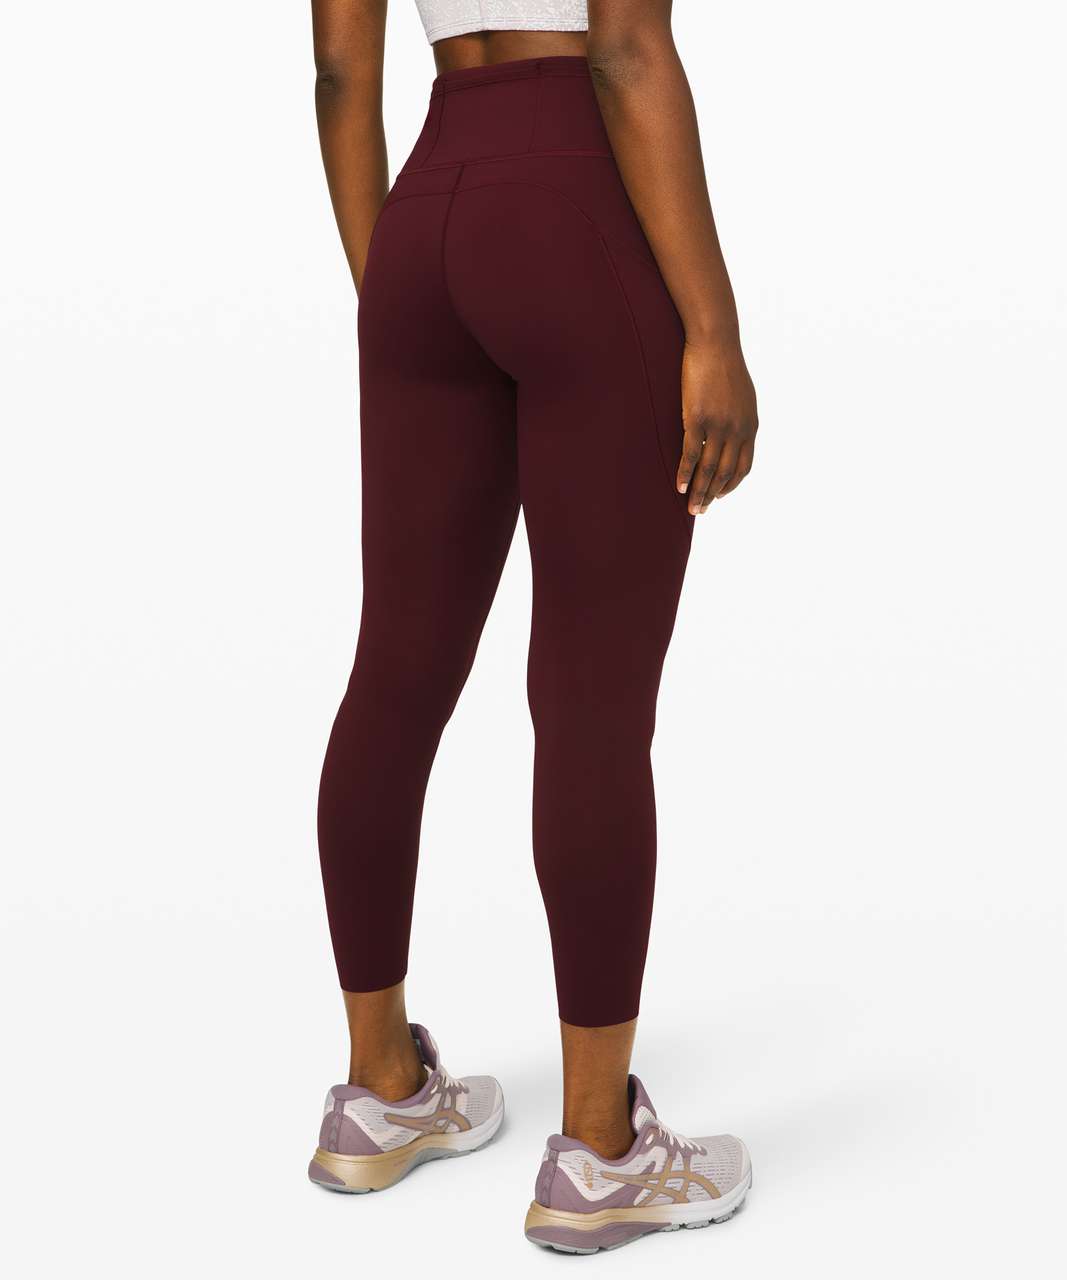 lululemon - The run crop of the summer, just dropped in new colours. Feel  fast and free in these barely there, sweat-wicking run crops. Made with  Nulux™ fabric that is quick-drying, sweat-wicking